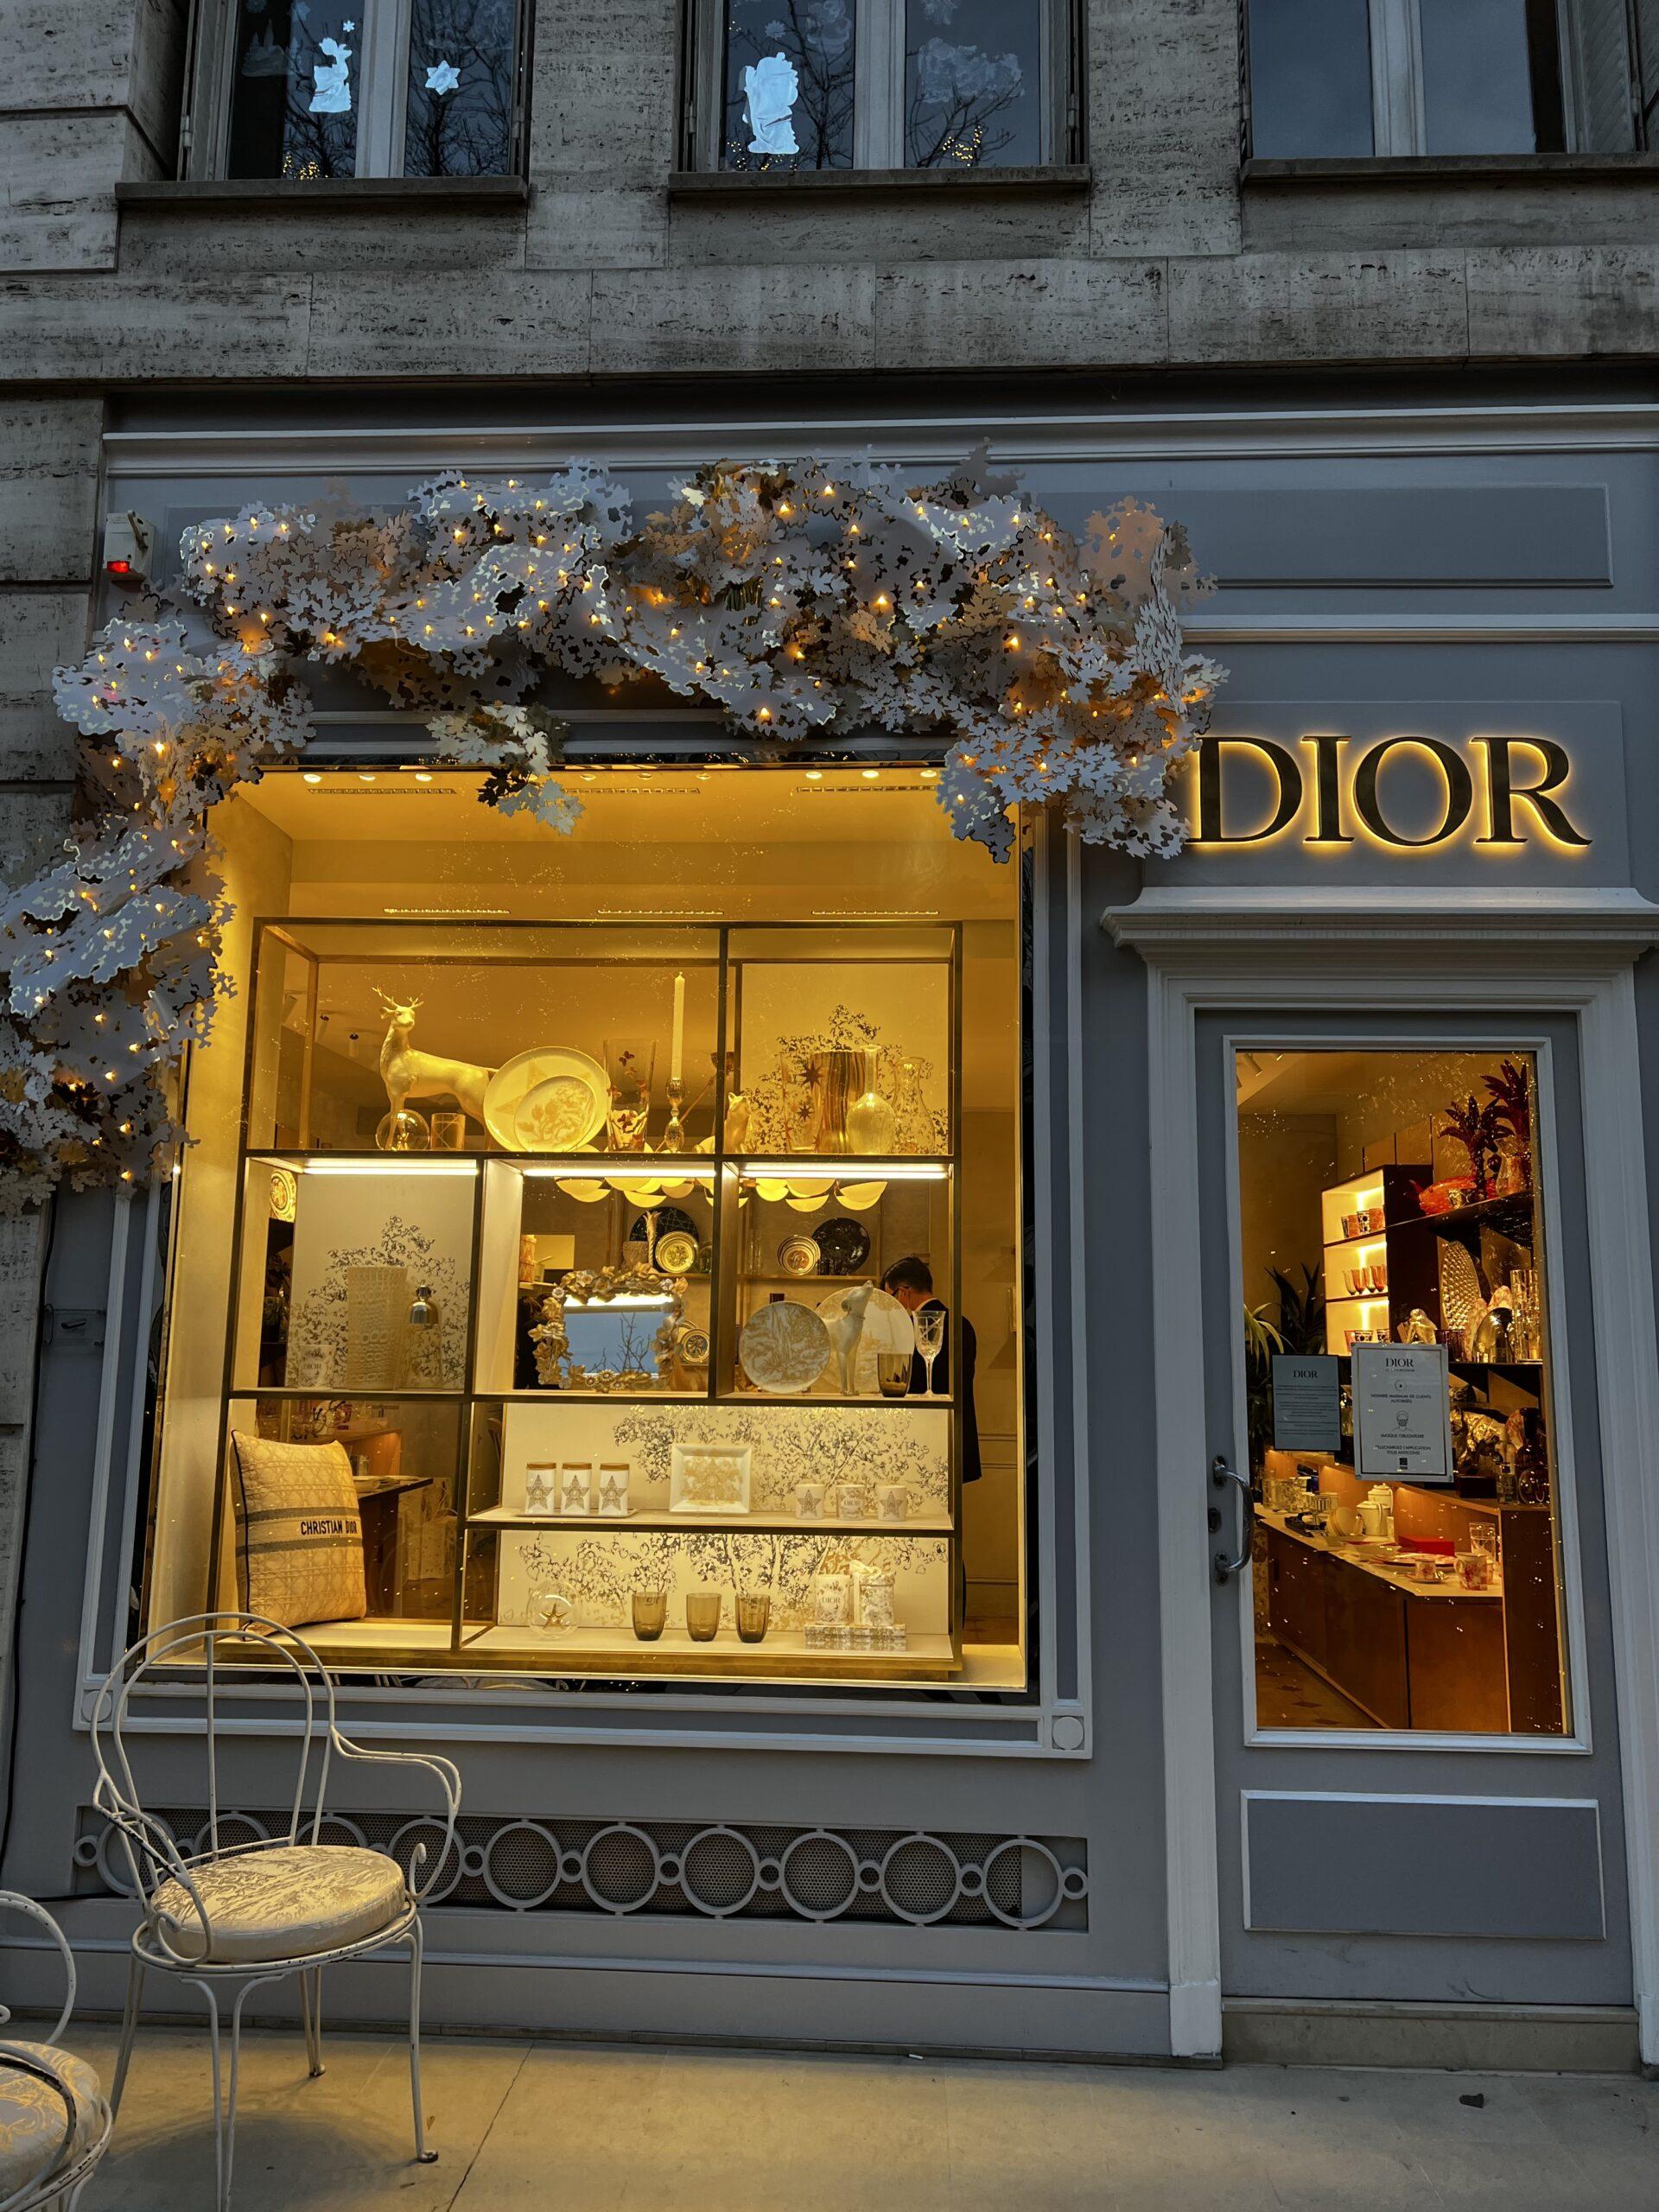 Is there anything left in the @Dior store? Maybe, maybe not